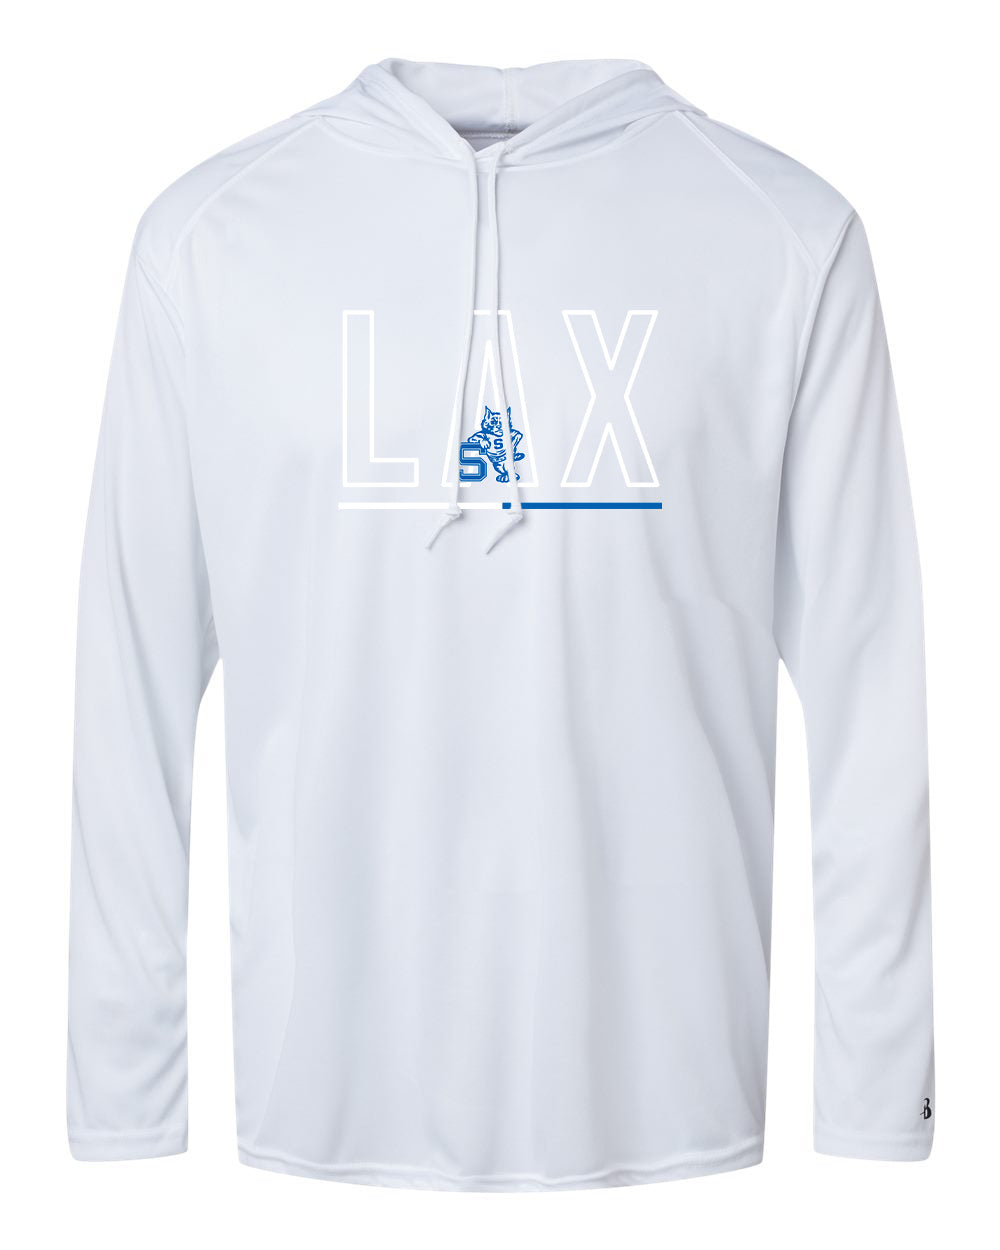 Suffield High Lacrosse - Adult B-Core LS Hooded T-shirt "LAX" - 4105 (color options available)